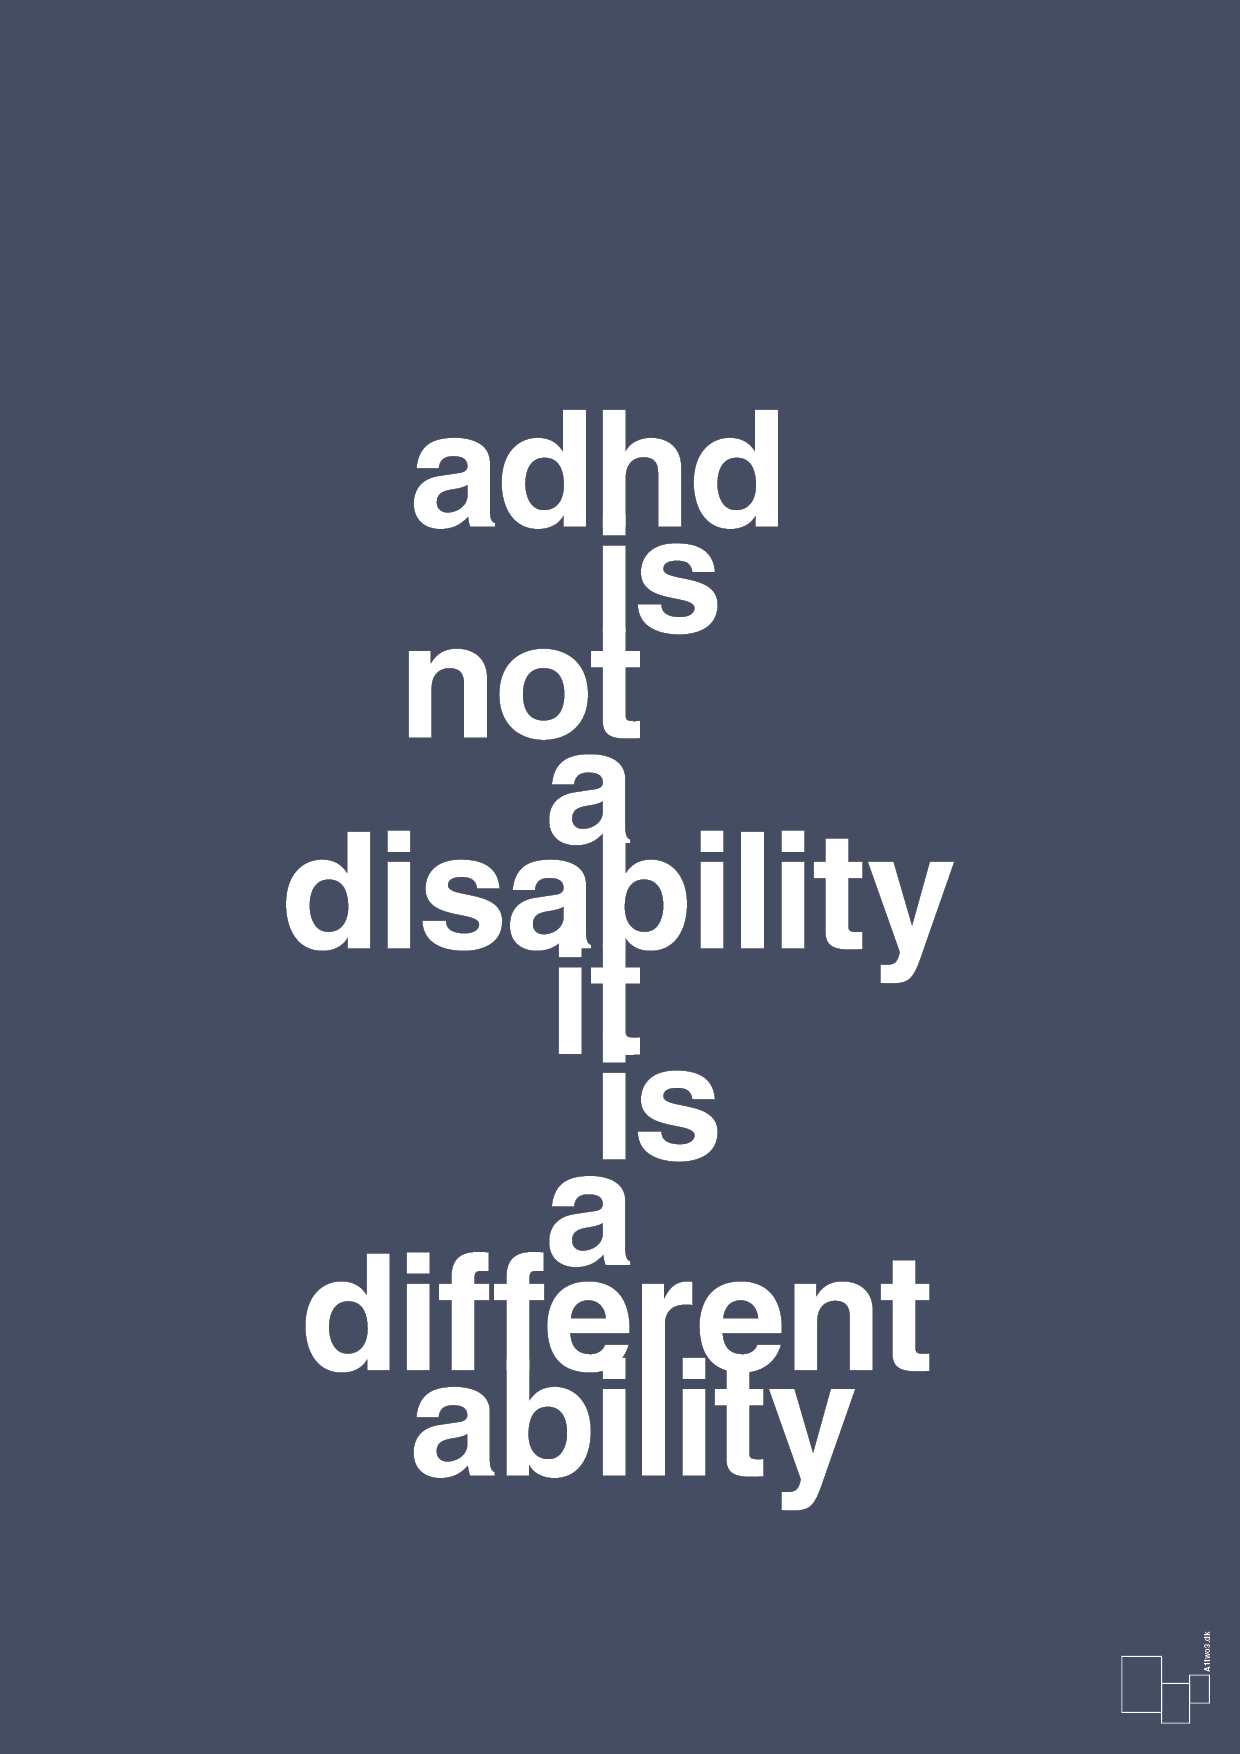 adhd is not a disability it is a different ability - Plakat med Samfund i Petrol